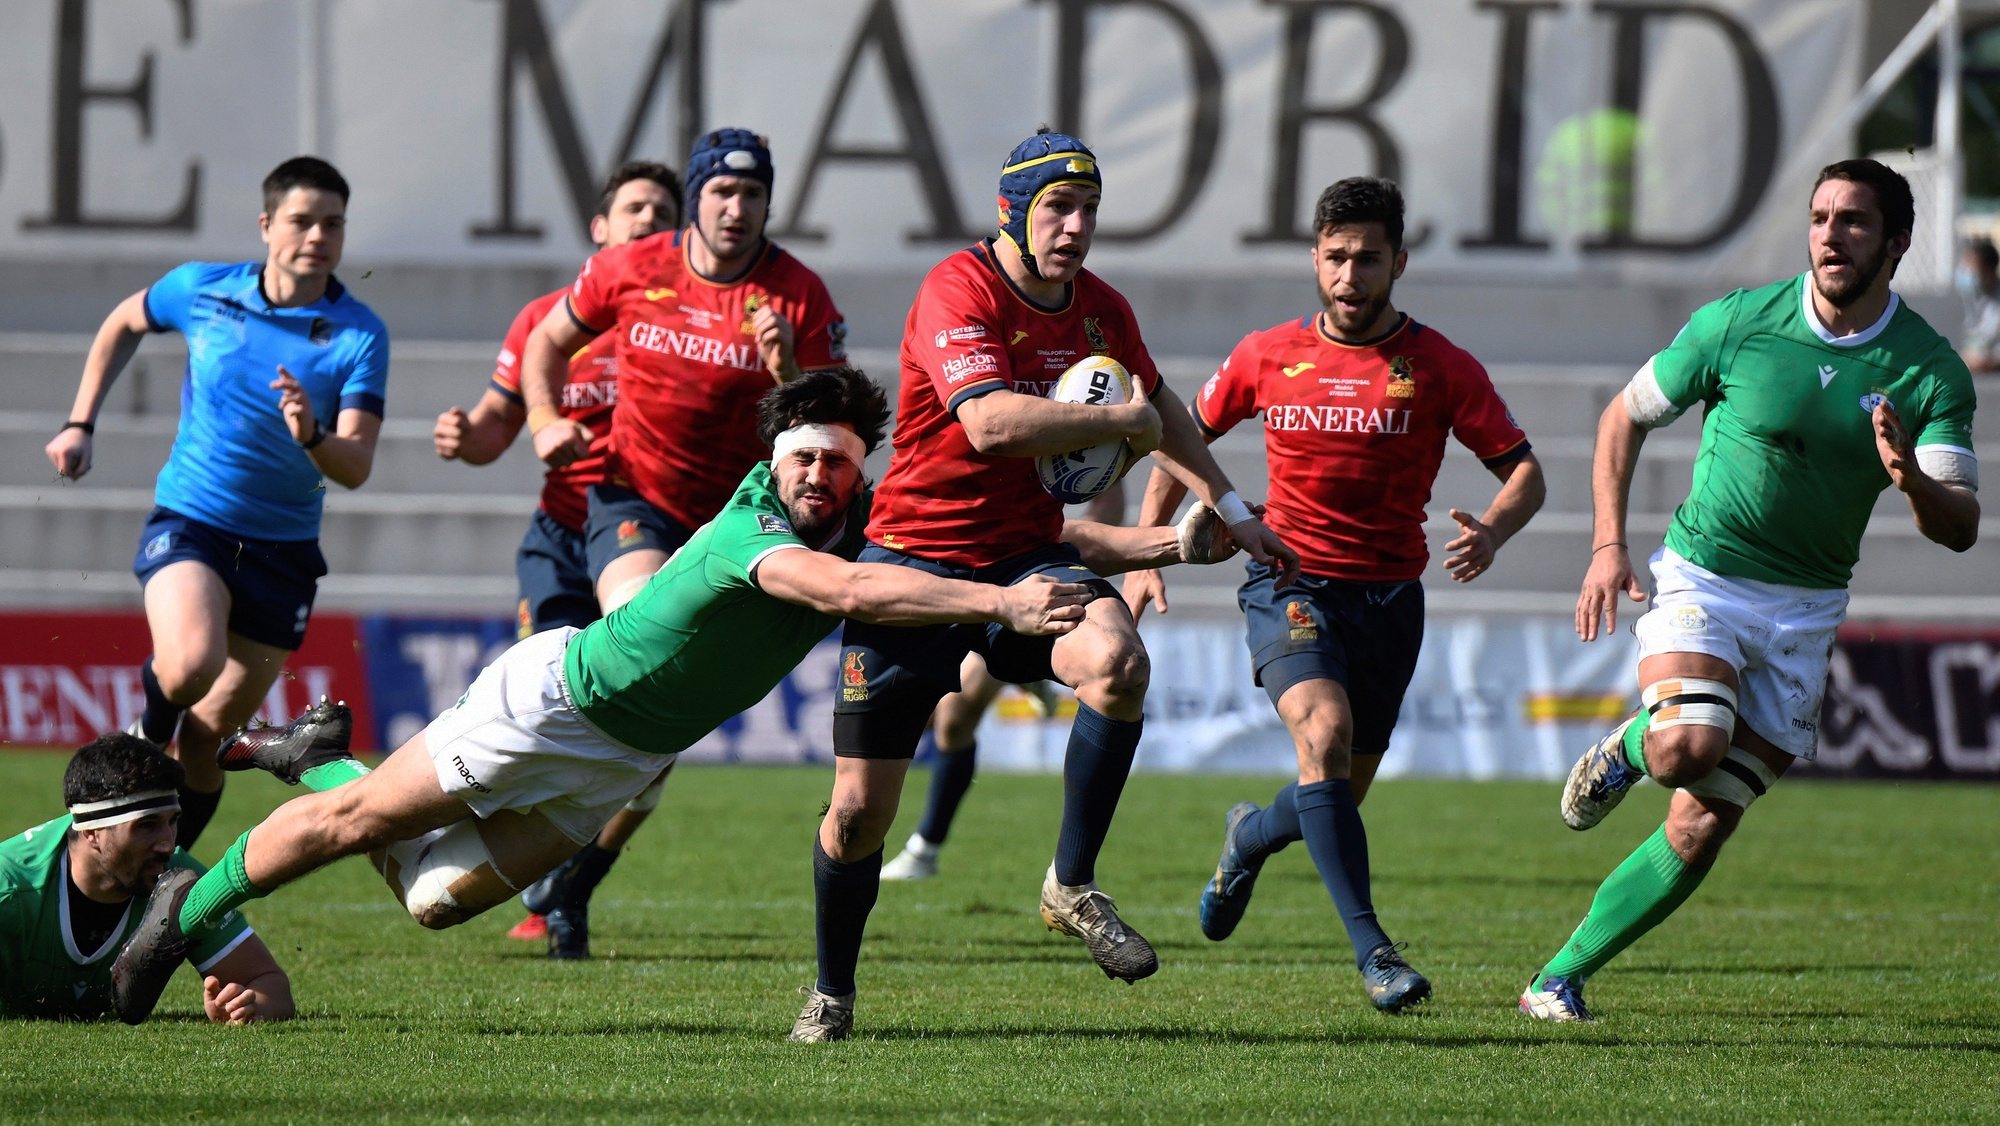 epa08993583 Spanish player Alvaro Gimeno (C) is tackled by Portugal&#039;s Jose Vareta (2-L) during a Rugby Europe Championship 2020 match between Spain and Portugal at Central de la Complutense stadium, in Madrid, Spain, 07 February 2021.  EPA/VICTOR LERENA